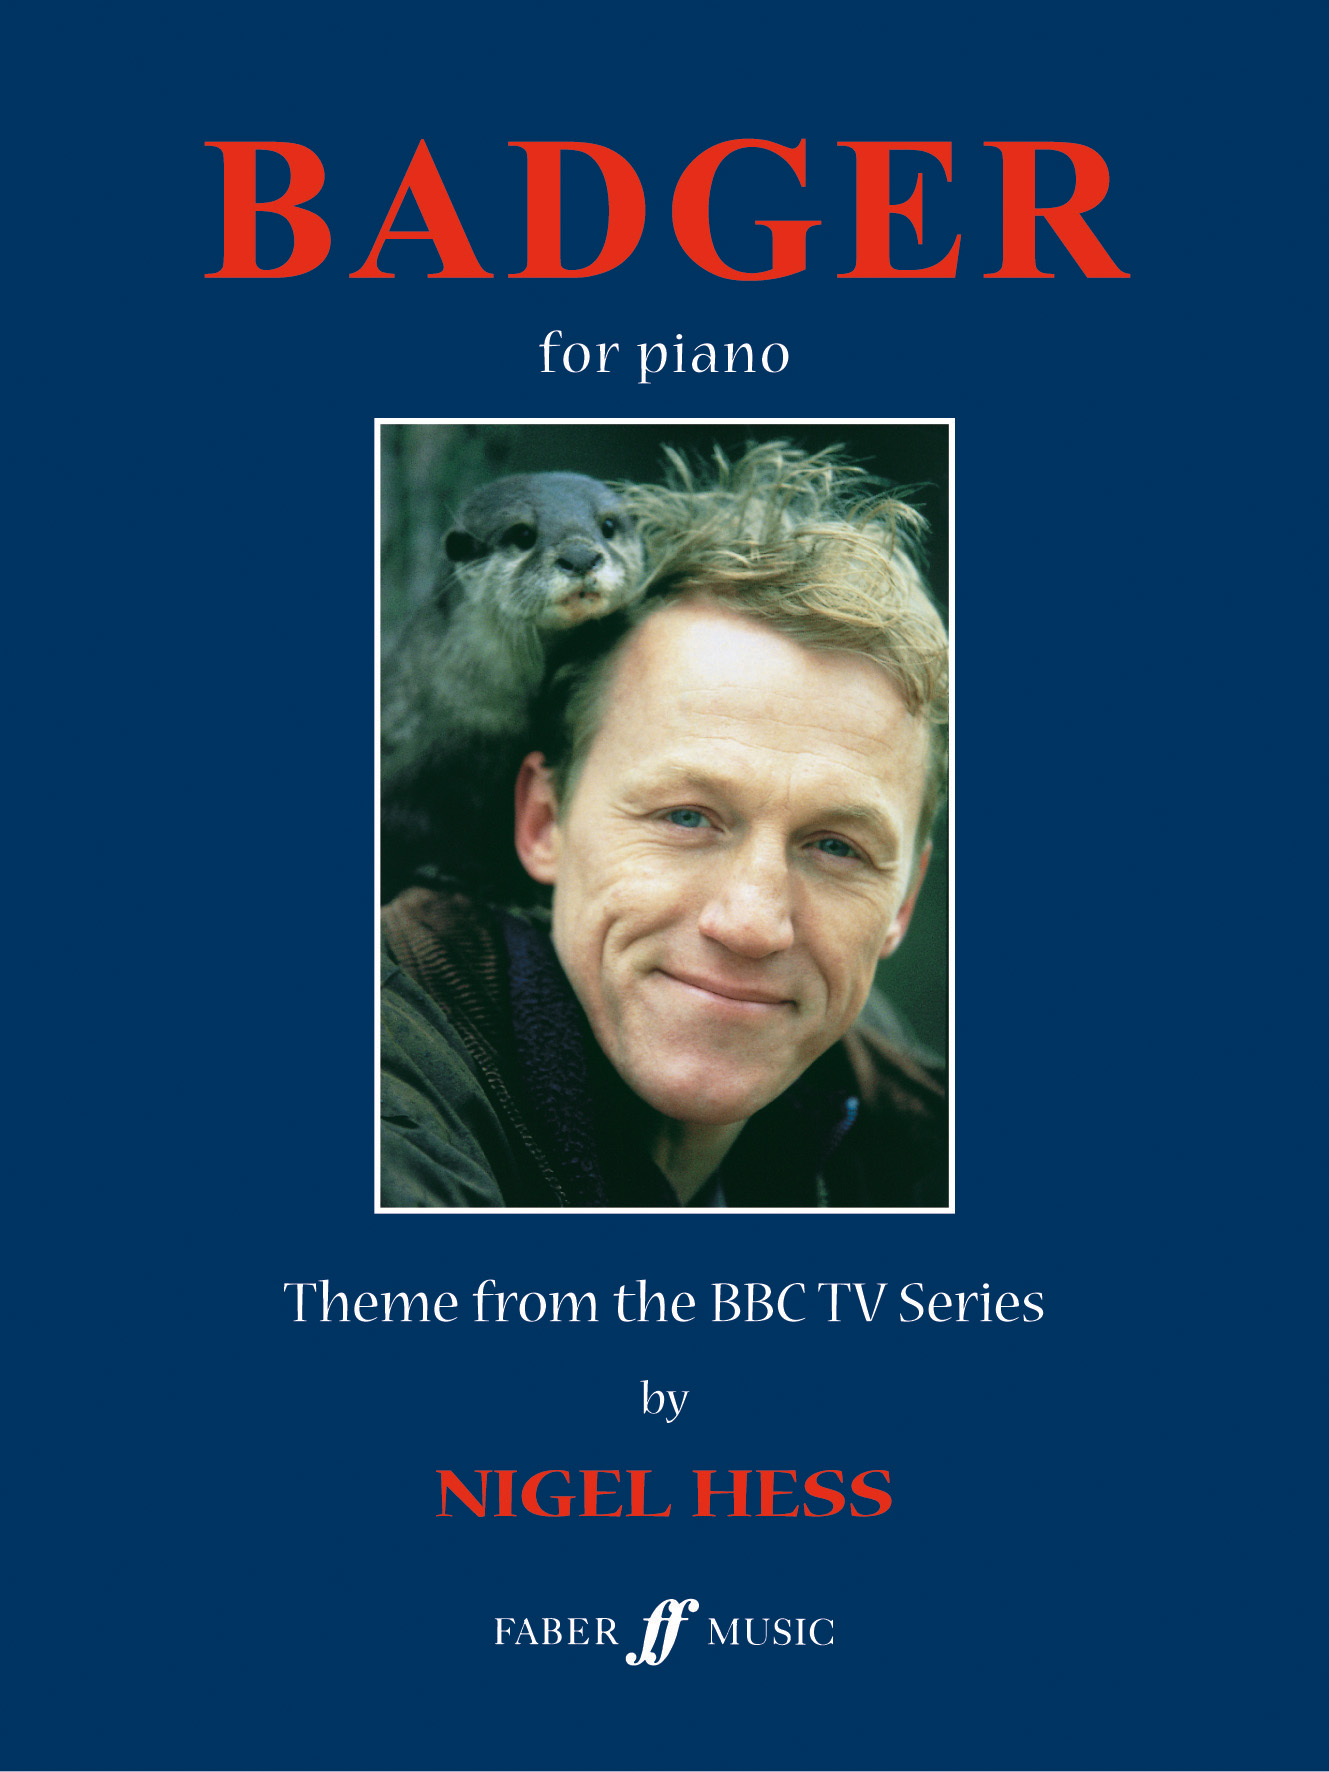 Nigel Hess: Badger. Theme from the TV series: Piano  Vocal  Guitar